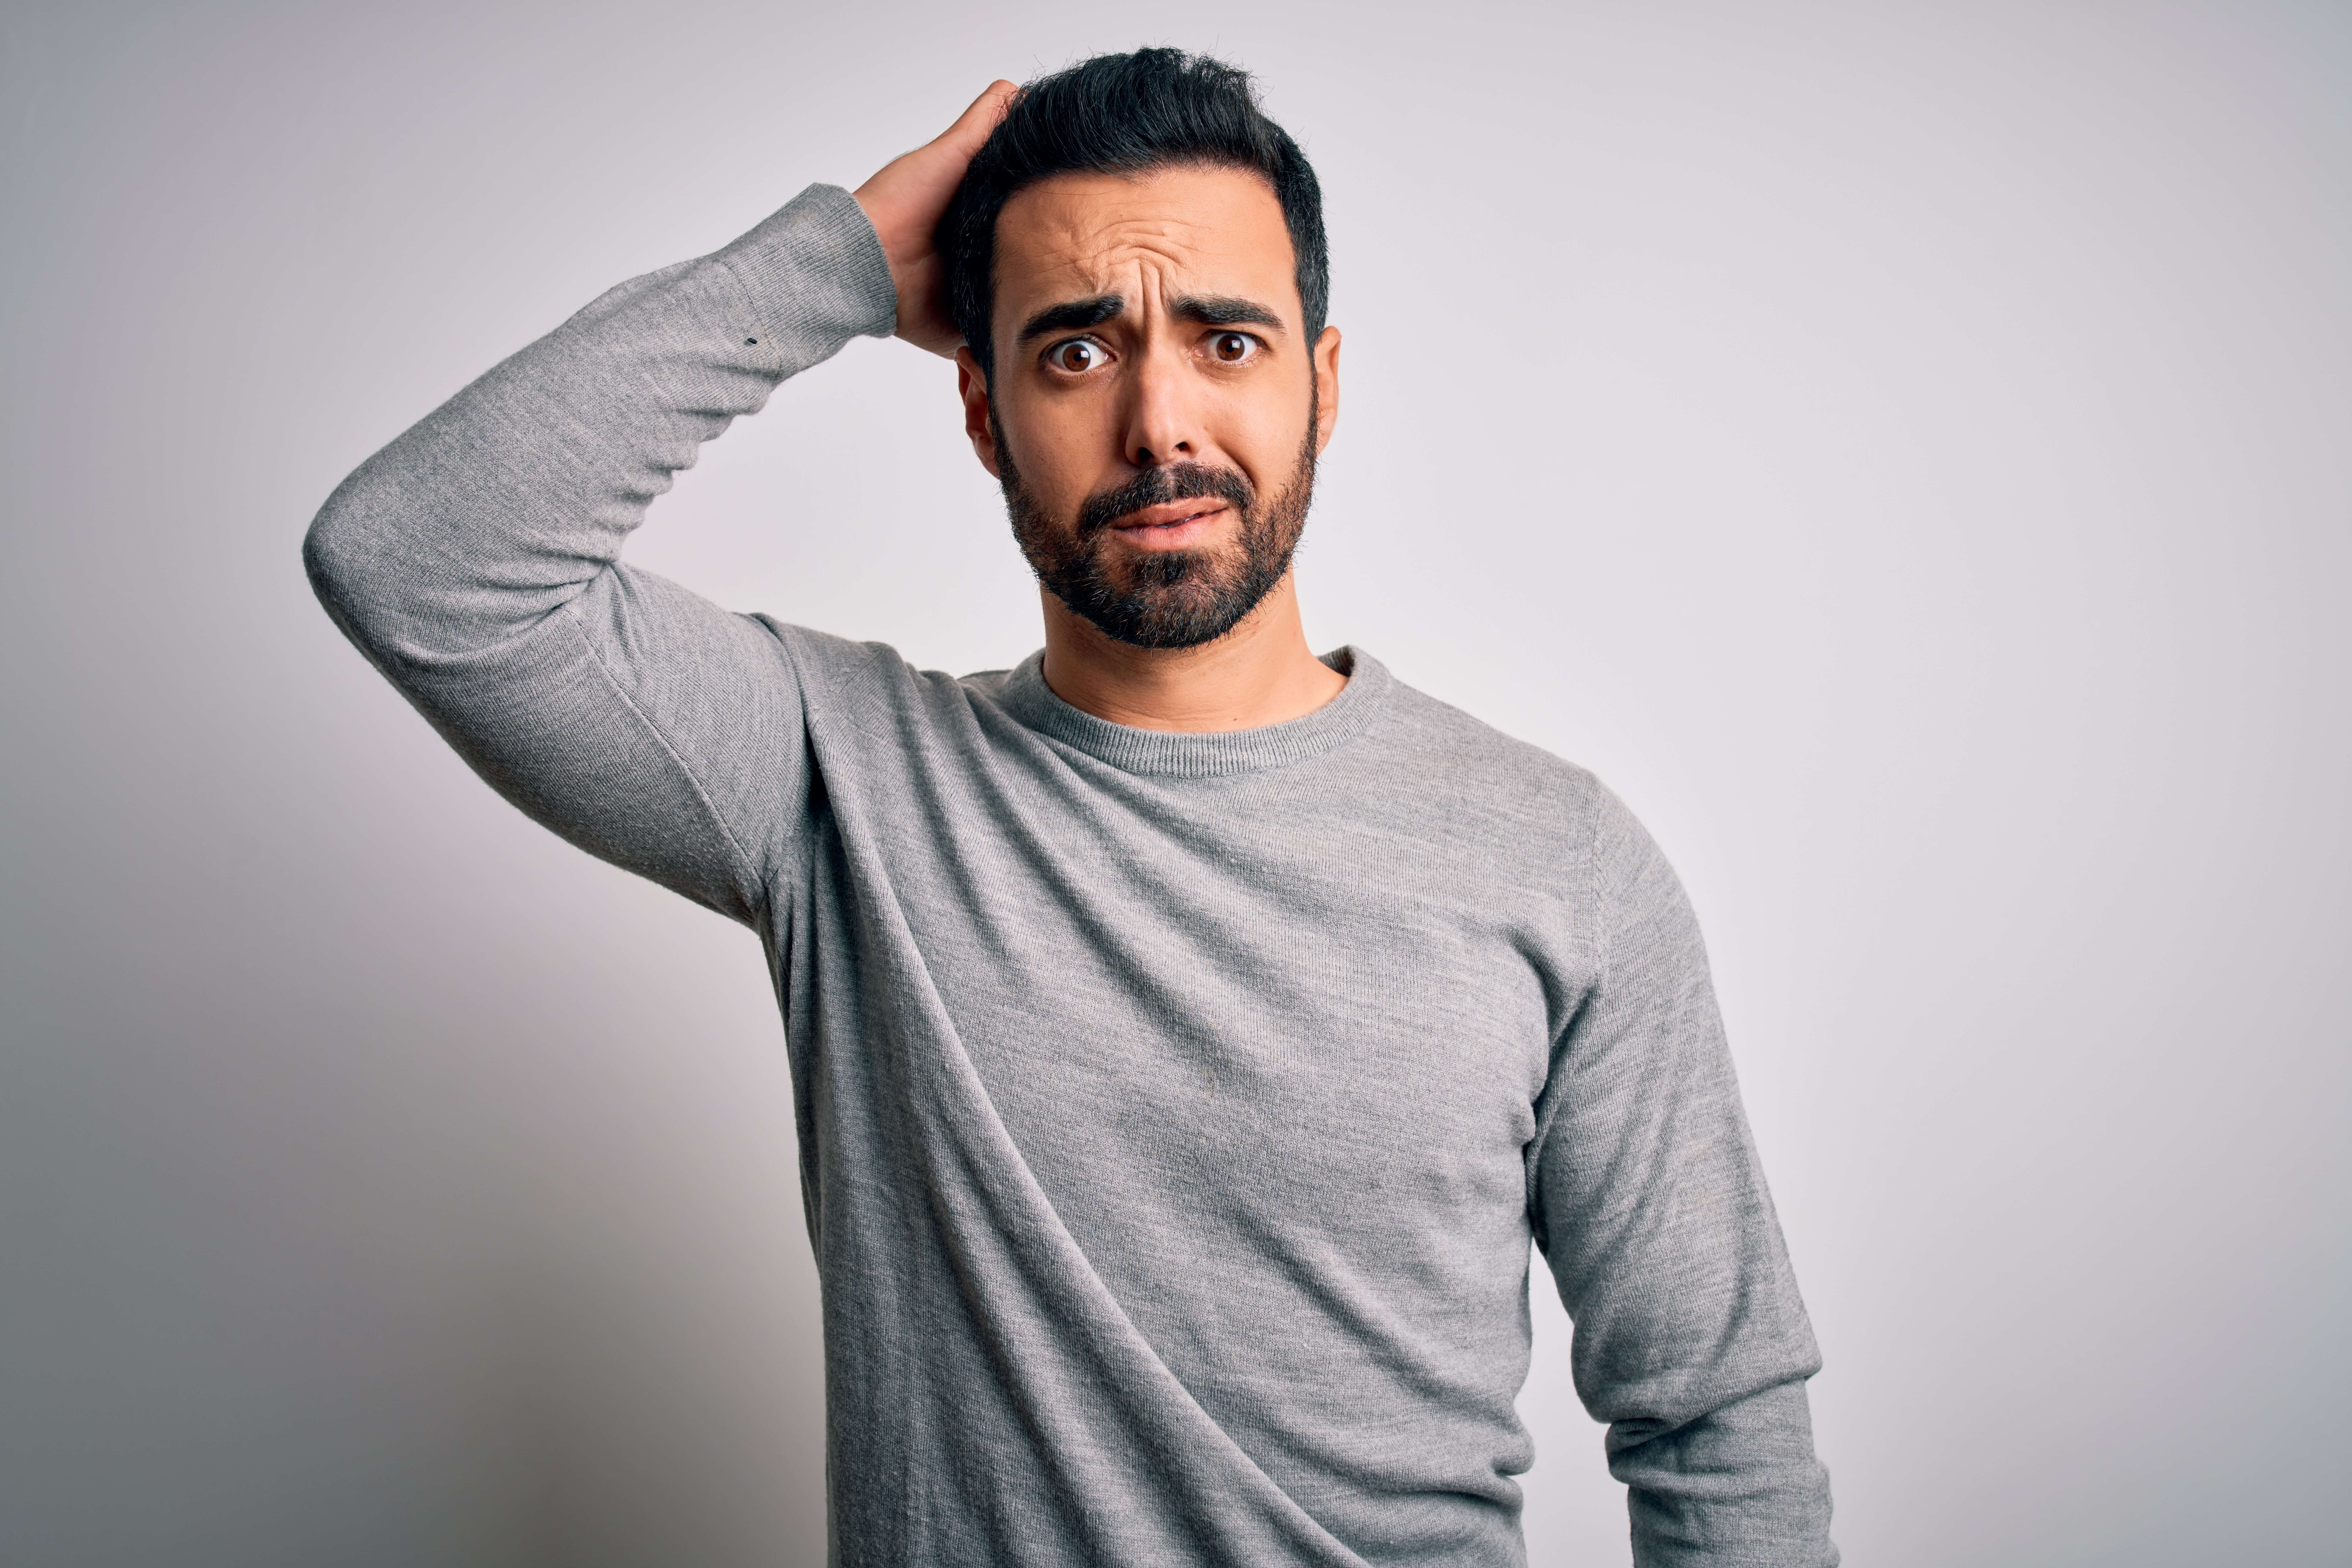 An olive-skinned man with black hair and beard and a grey sweater stands in front of a blank grey wall with his right arm raised behind his head and a look of deep confusion